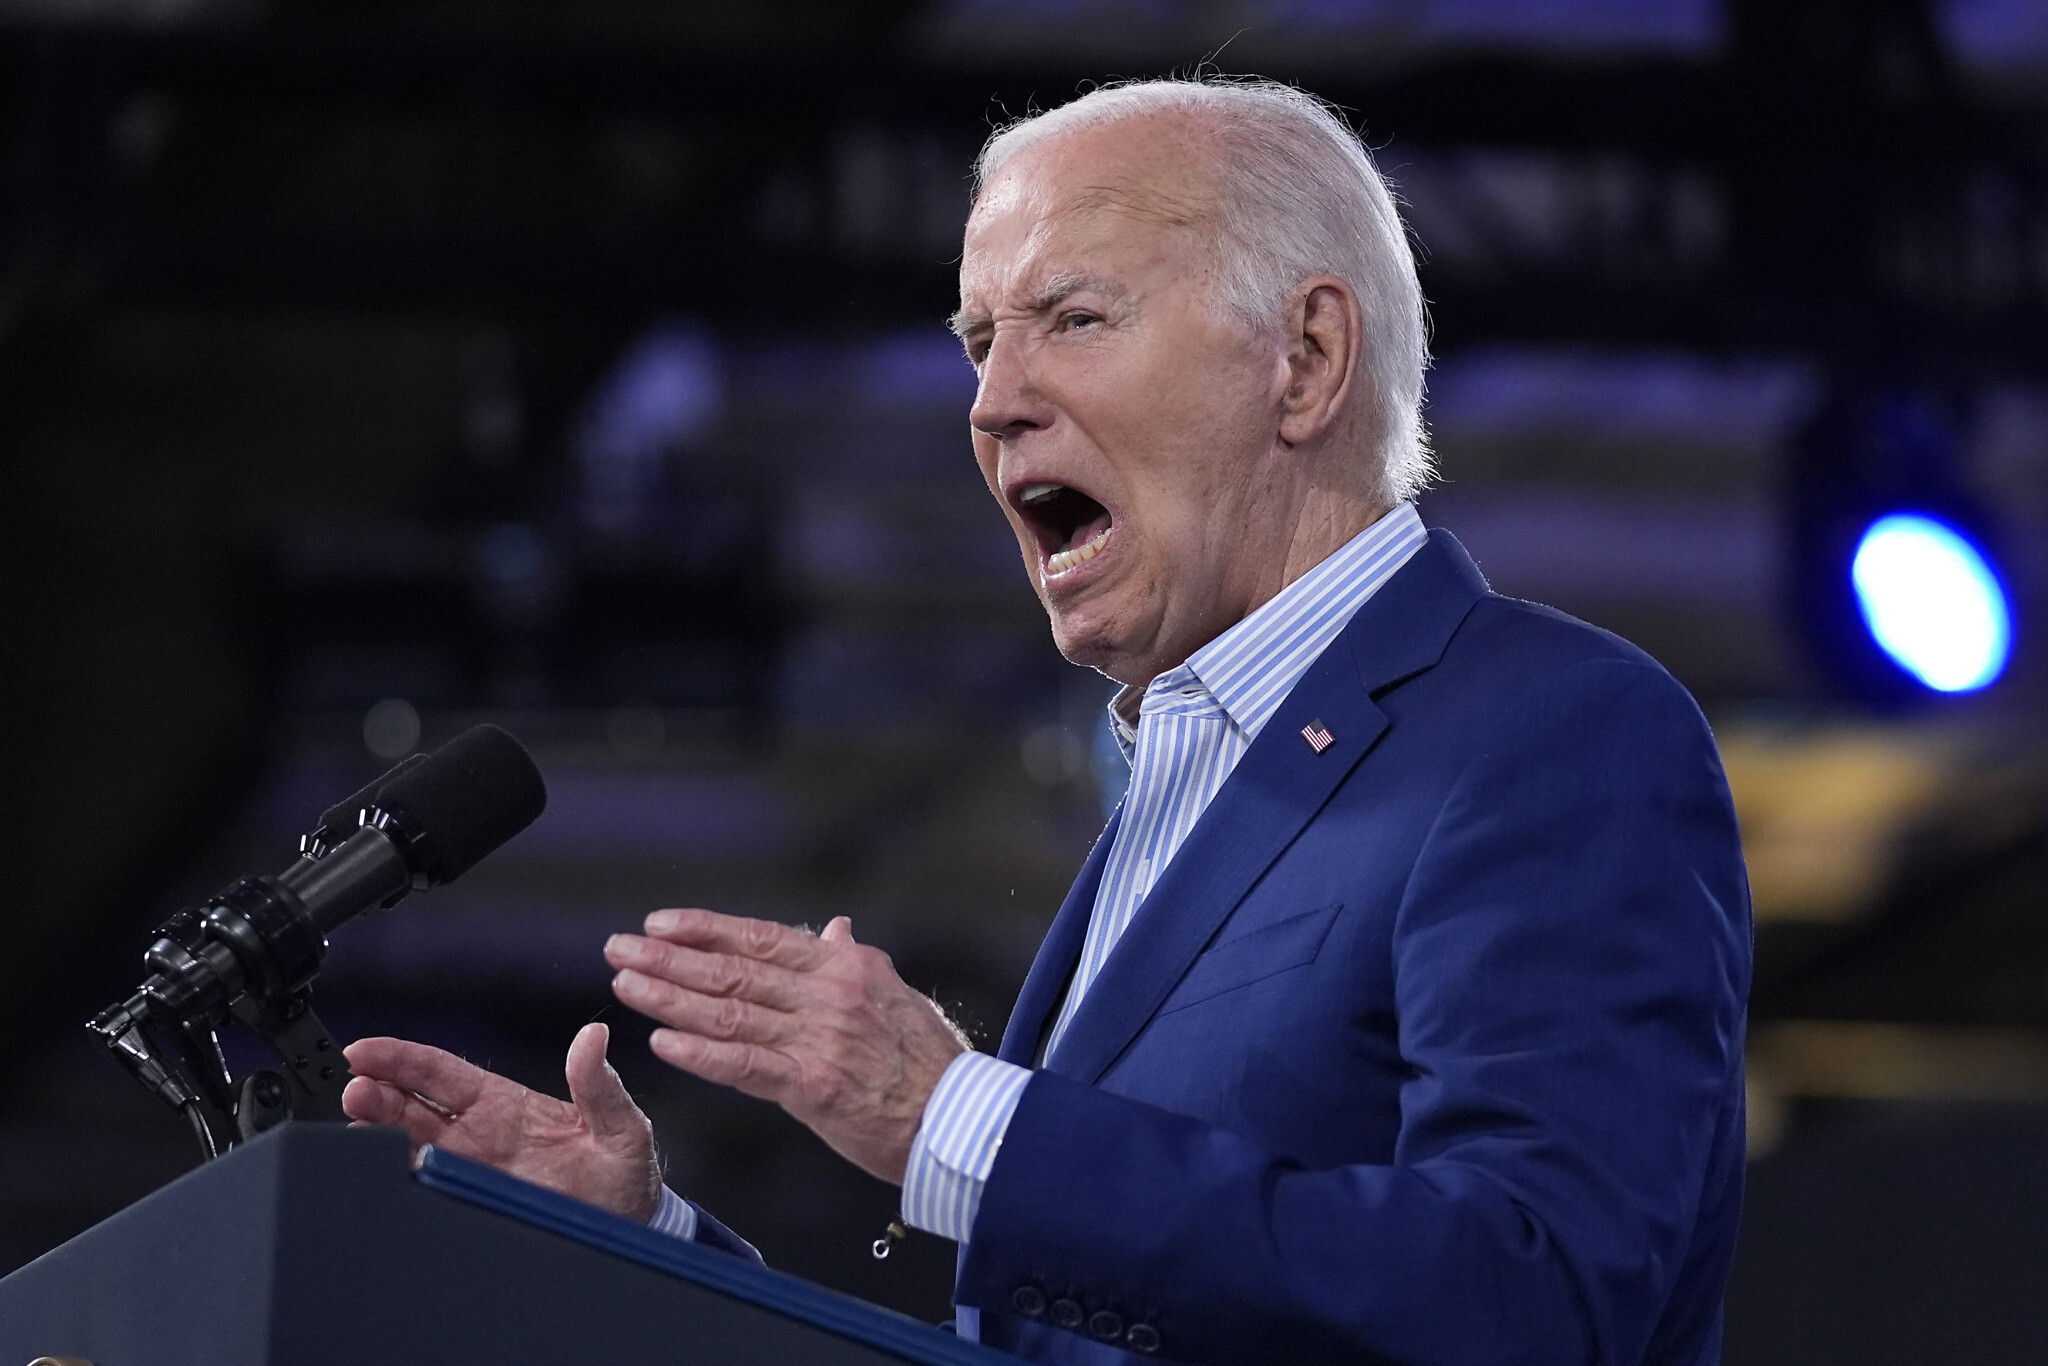 Can the Democratic Party Remove Biden and Replace Him With Someone Else?